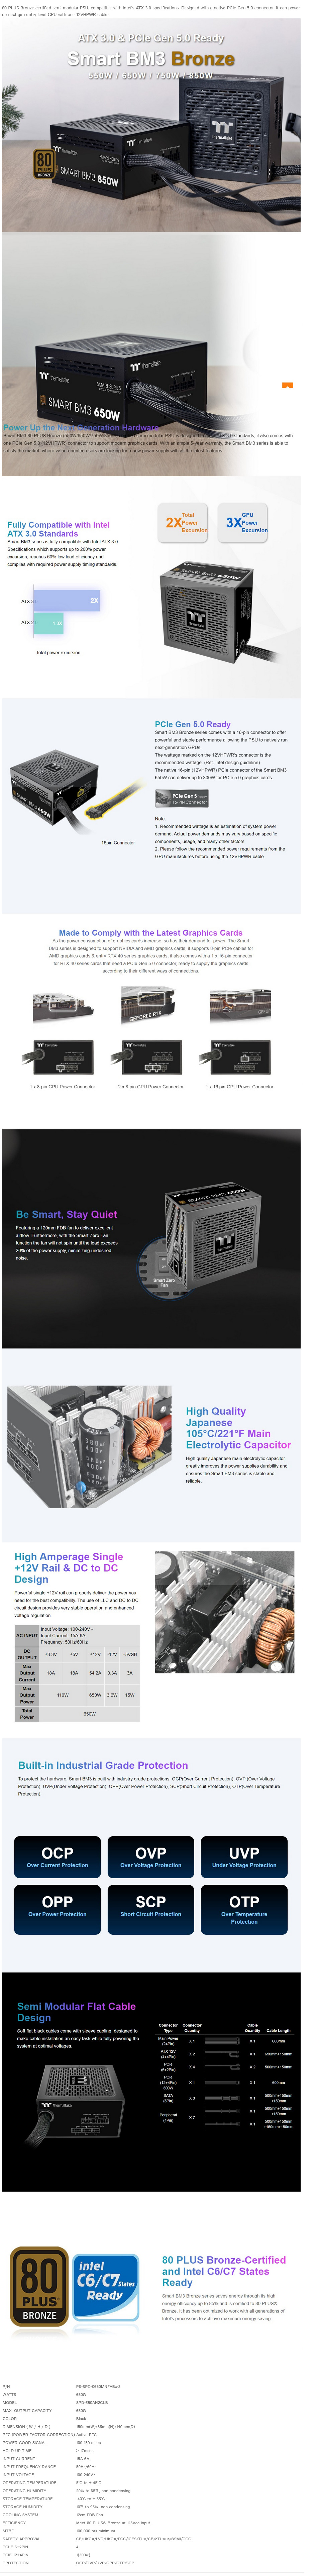 A large marketing image providing additional information about the product Thermaltake Smart BM3 - 650W 80PLUS Bronze PCIe 5.0 ATX  Semi-Modular PSU - Additional alt info not provided